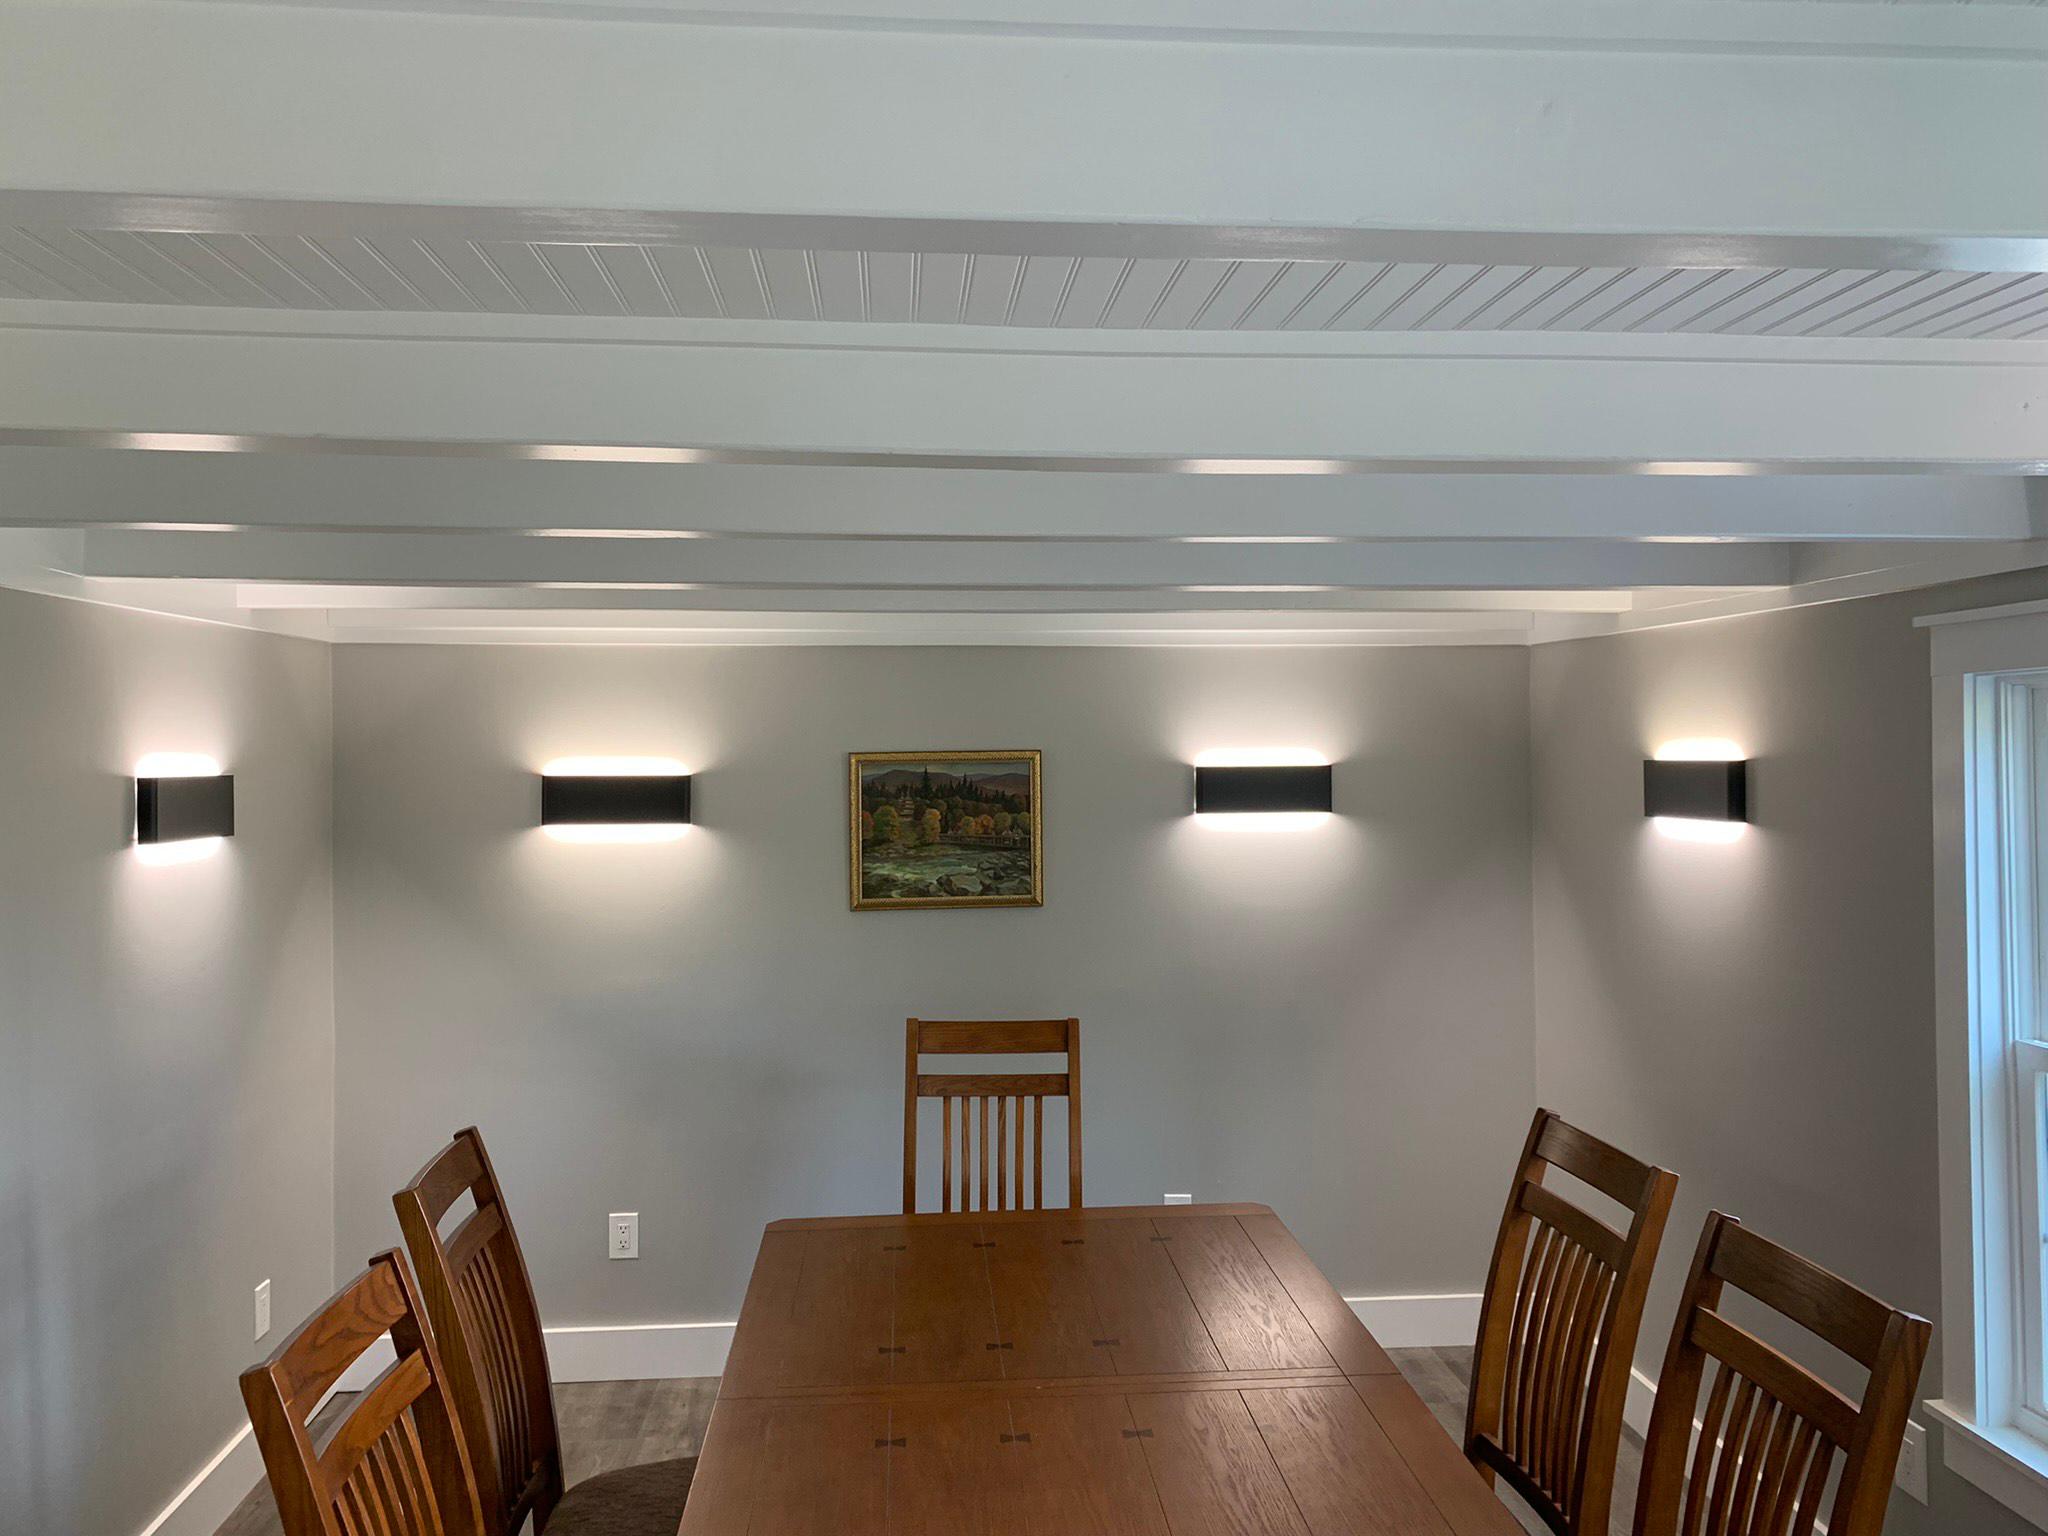 Upgrade your property with our professional electrical outlet installation services in Mahopac, NY. Powerone Home Service, LLC provides safe and efficient installations to meet your power needs and convenience requirements.